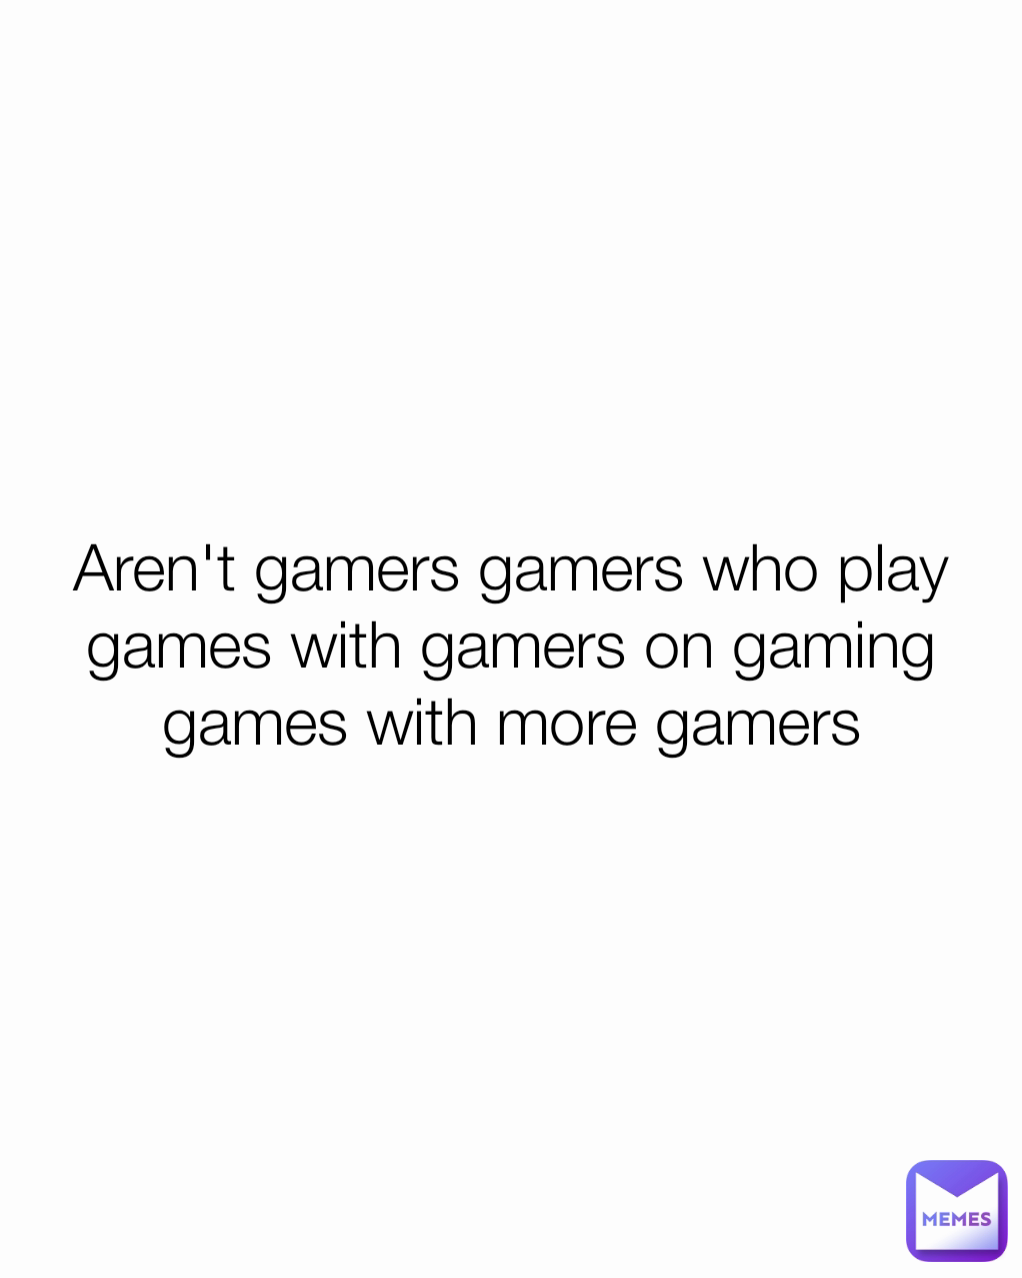 Aren't gamers gamers who play games with gamers on gaming games with more gamers